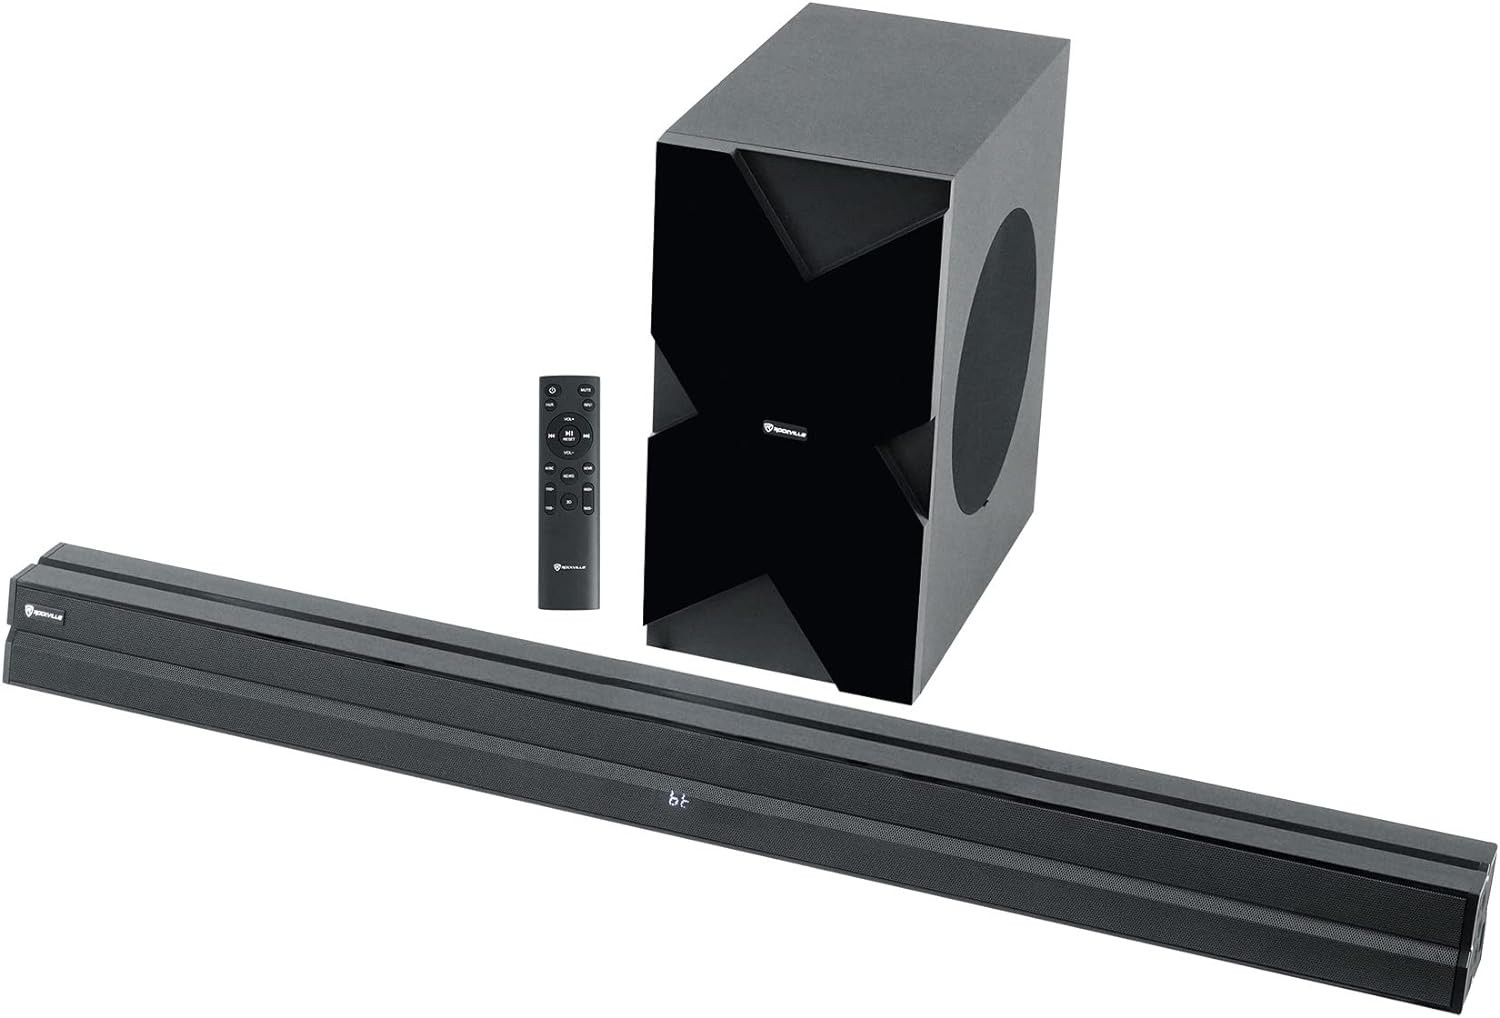 Rockville Dolby BAR Home Theater Sound Bar w/Wireless Subwoofer Review